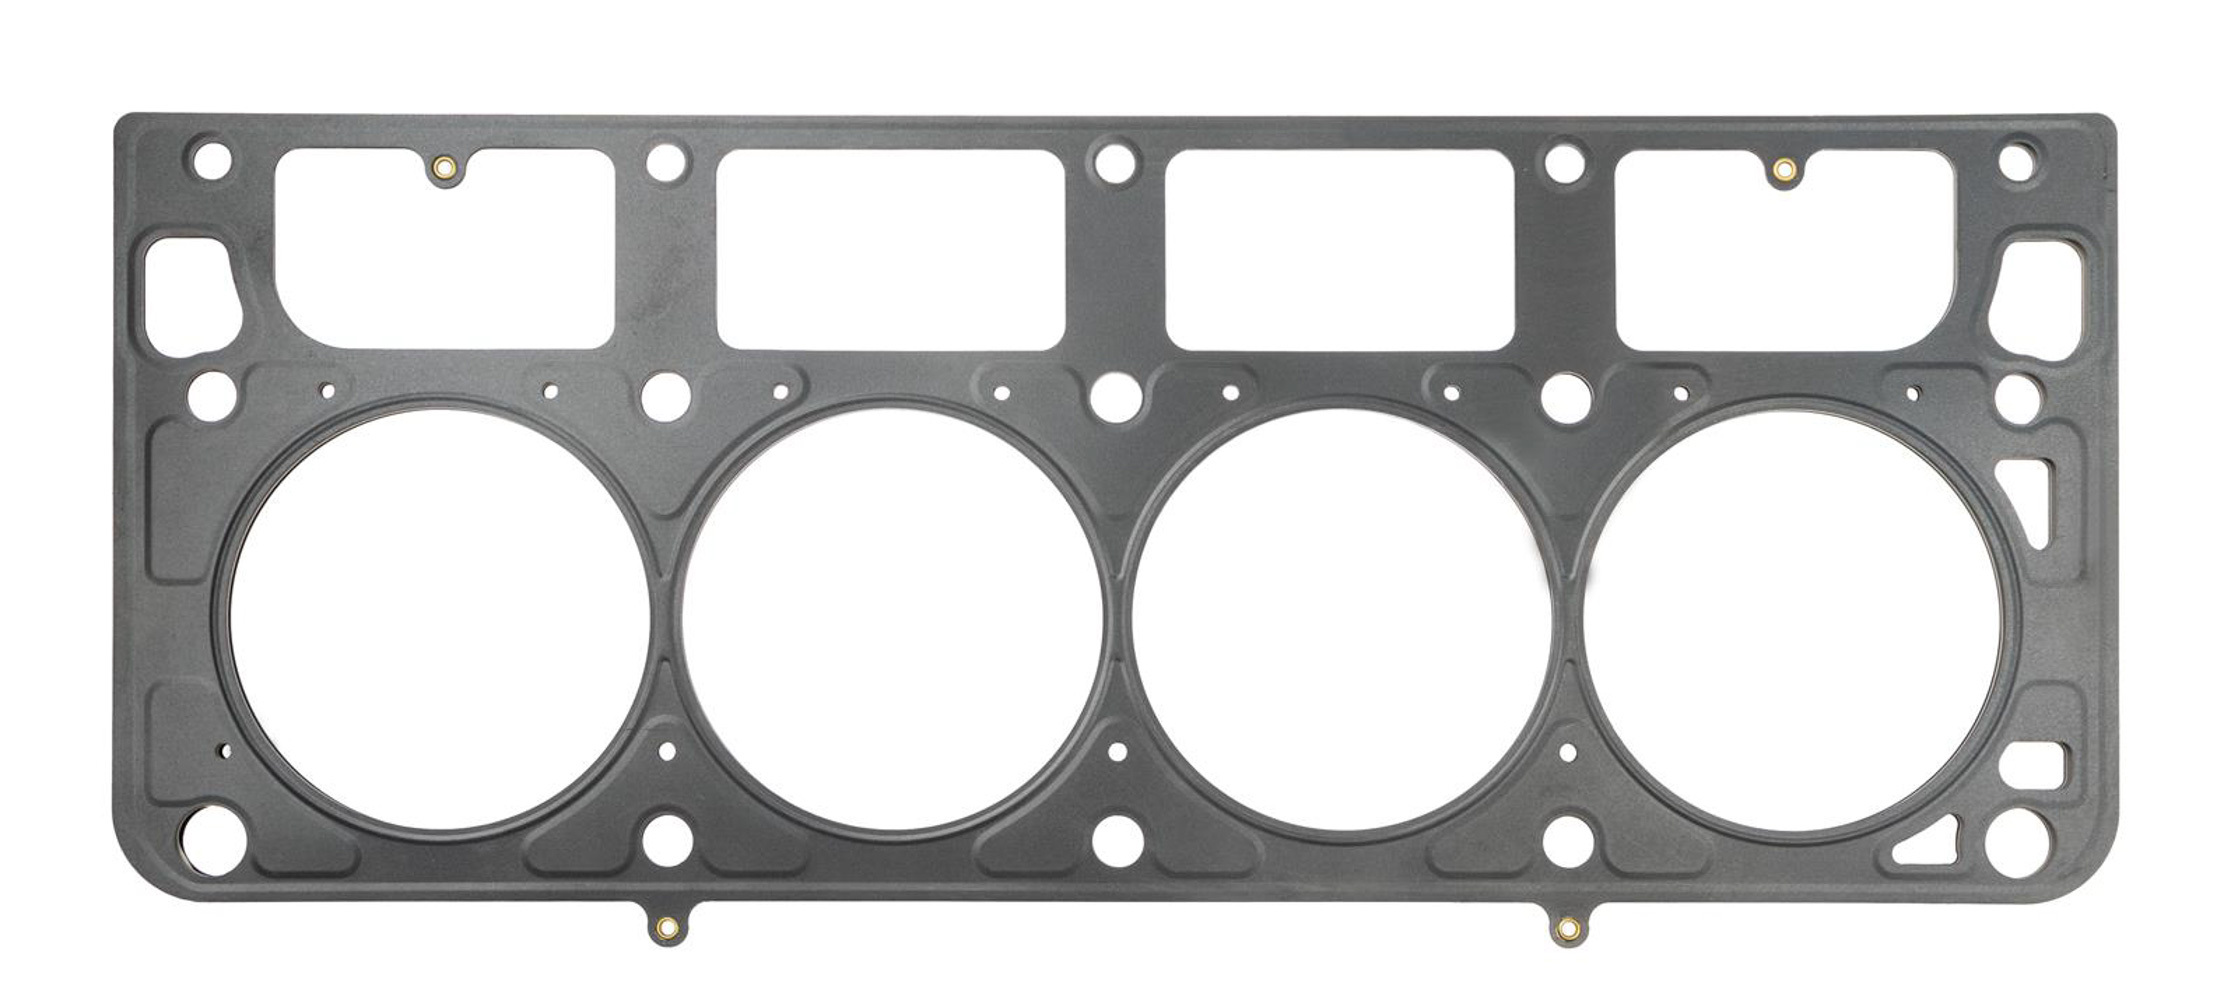 SCE Gaskets M201051 - Cylinder Head Gasket, MLS Spartan, 4.099 in Bore, 0.051 in Compression Thickness, Multi-Layer Steel, GM LS-Series, Each